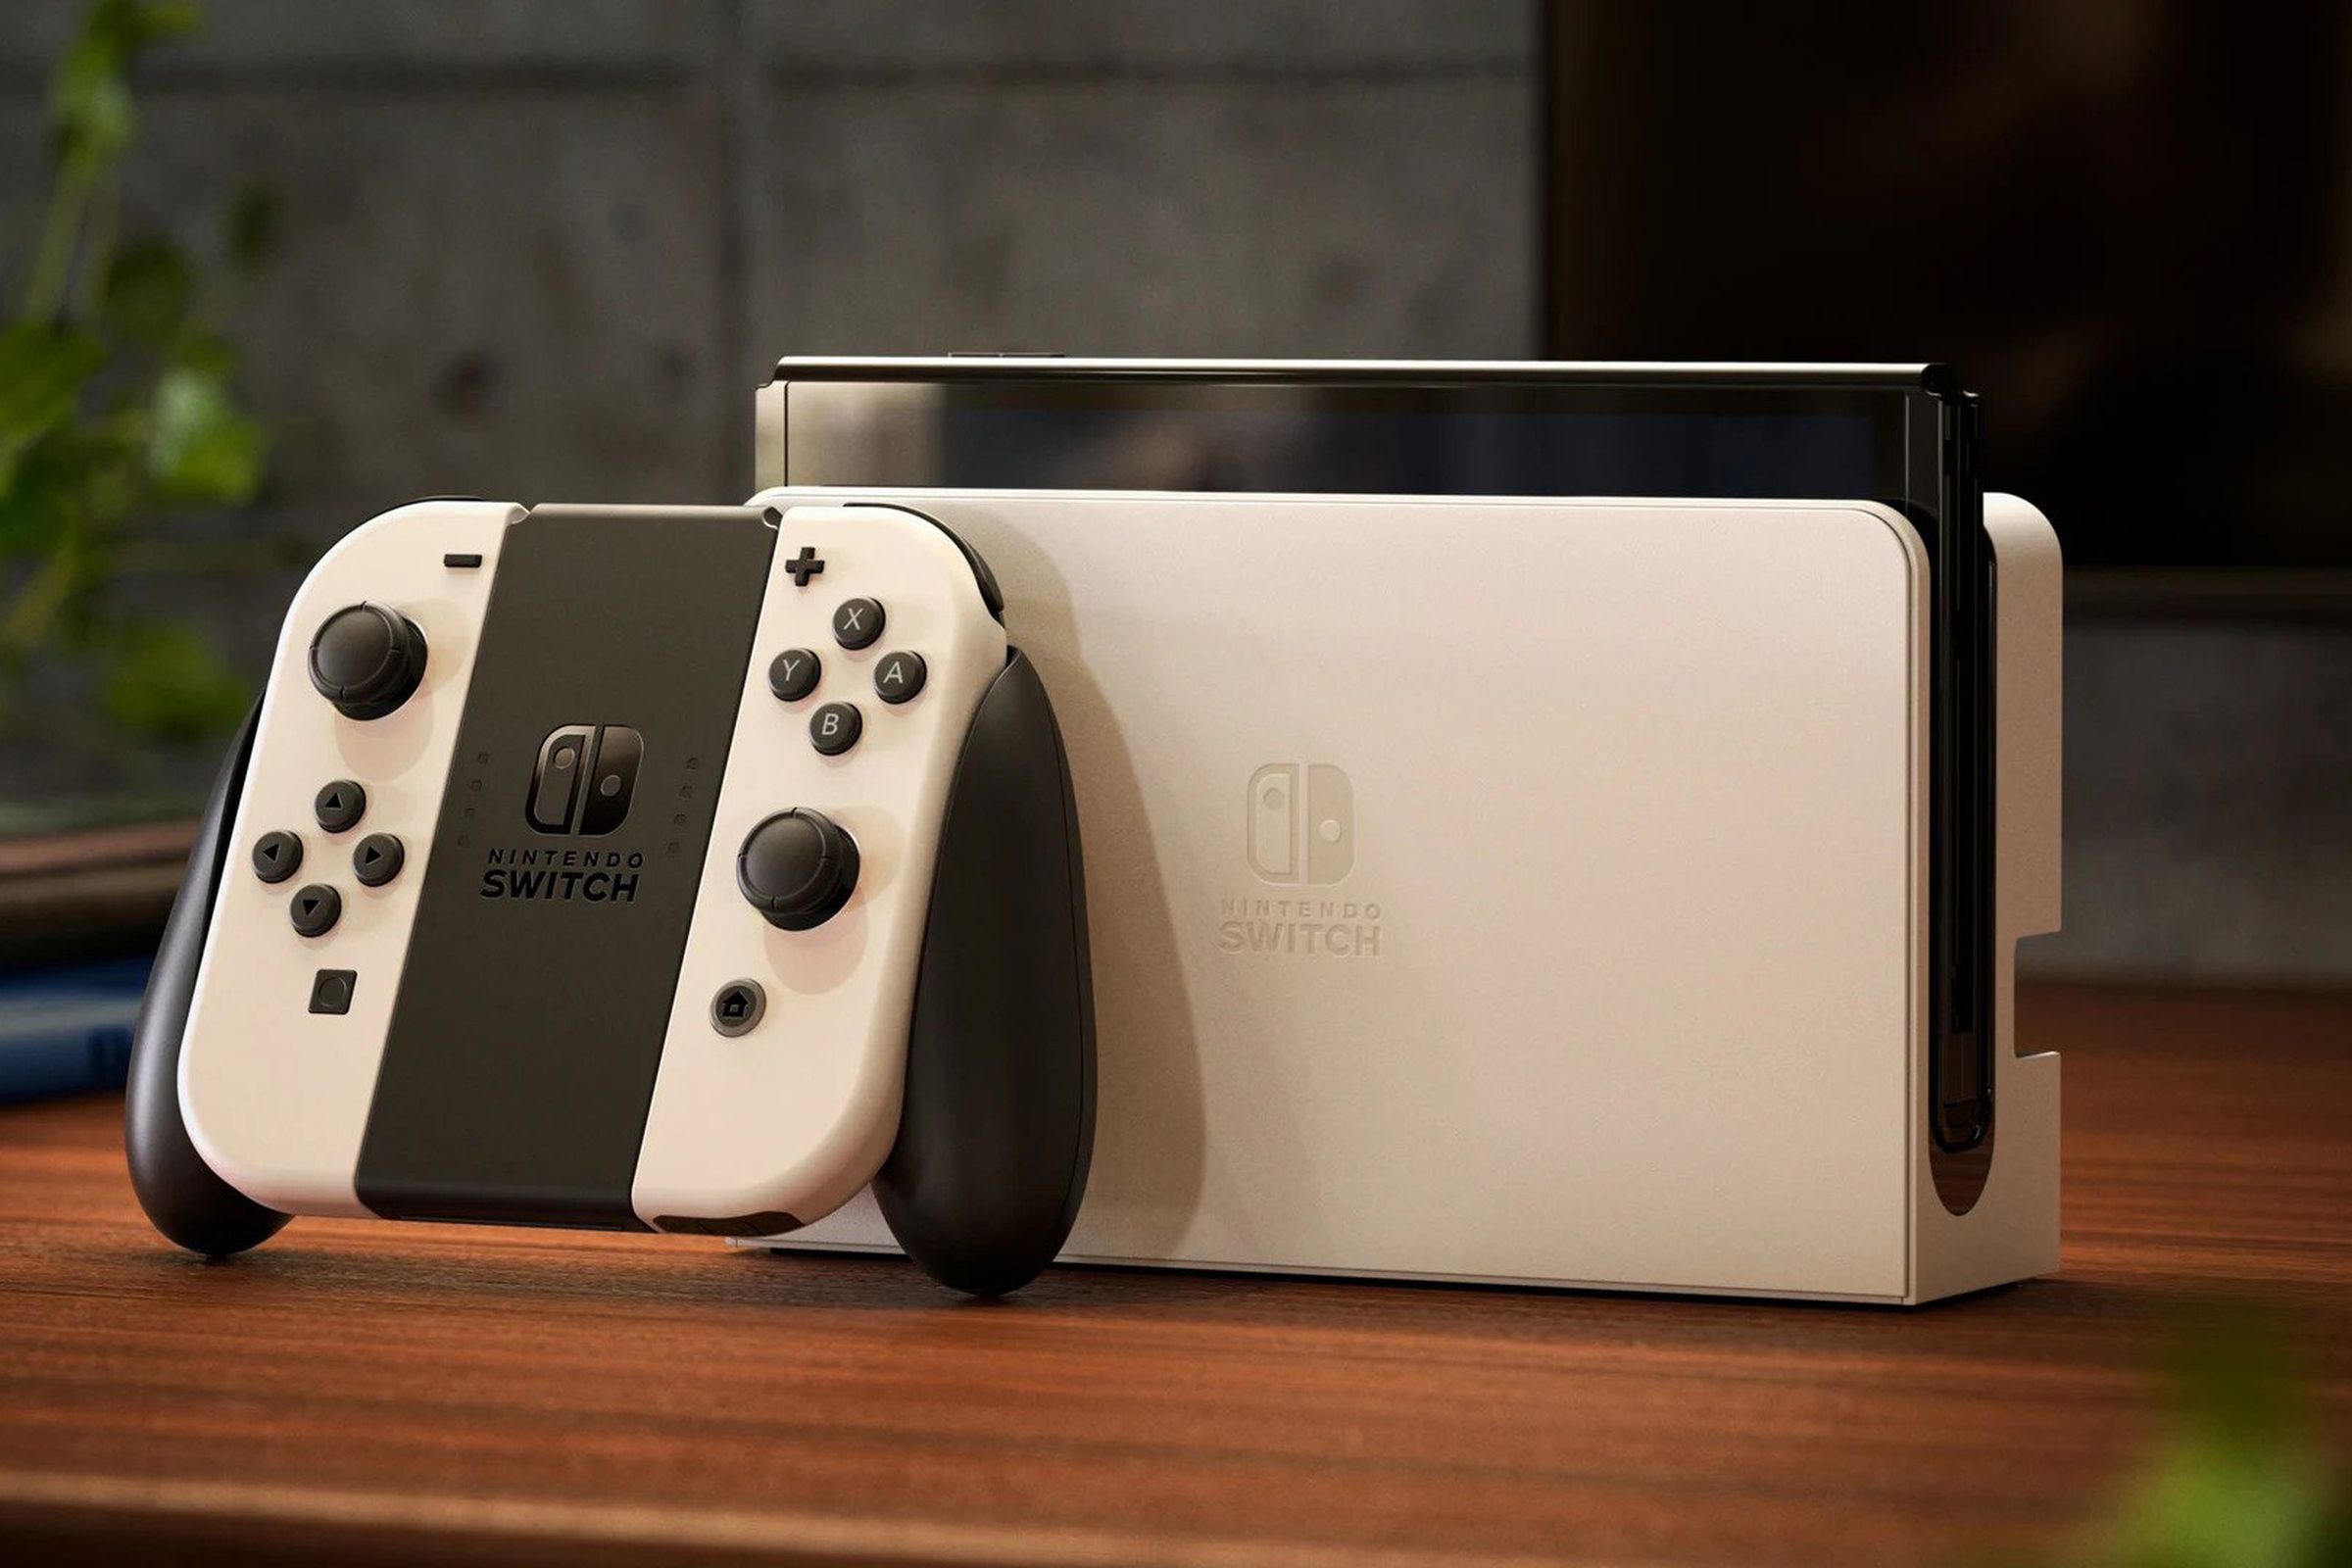 Nintendo’s Switch OLED model in white with its updated dock and accompanying Joy-Cons.